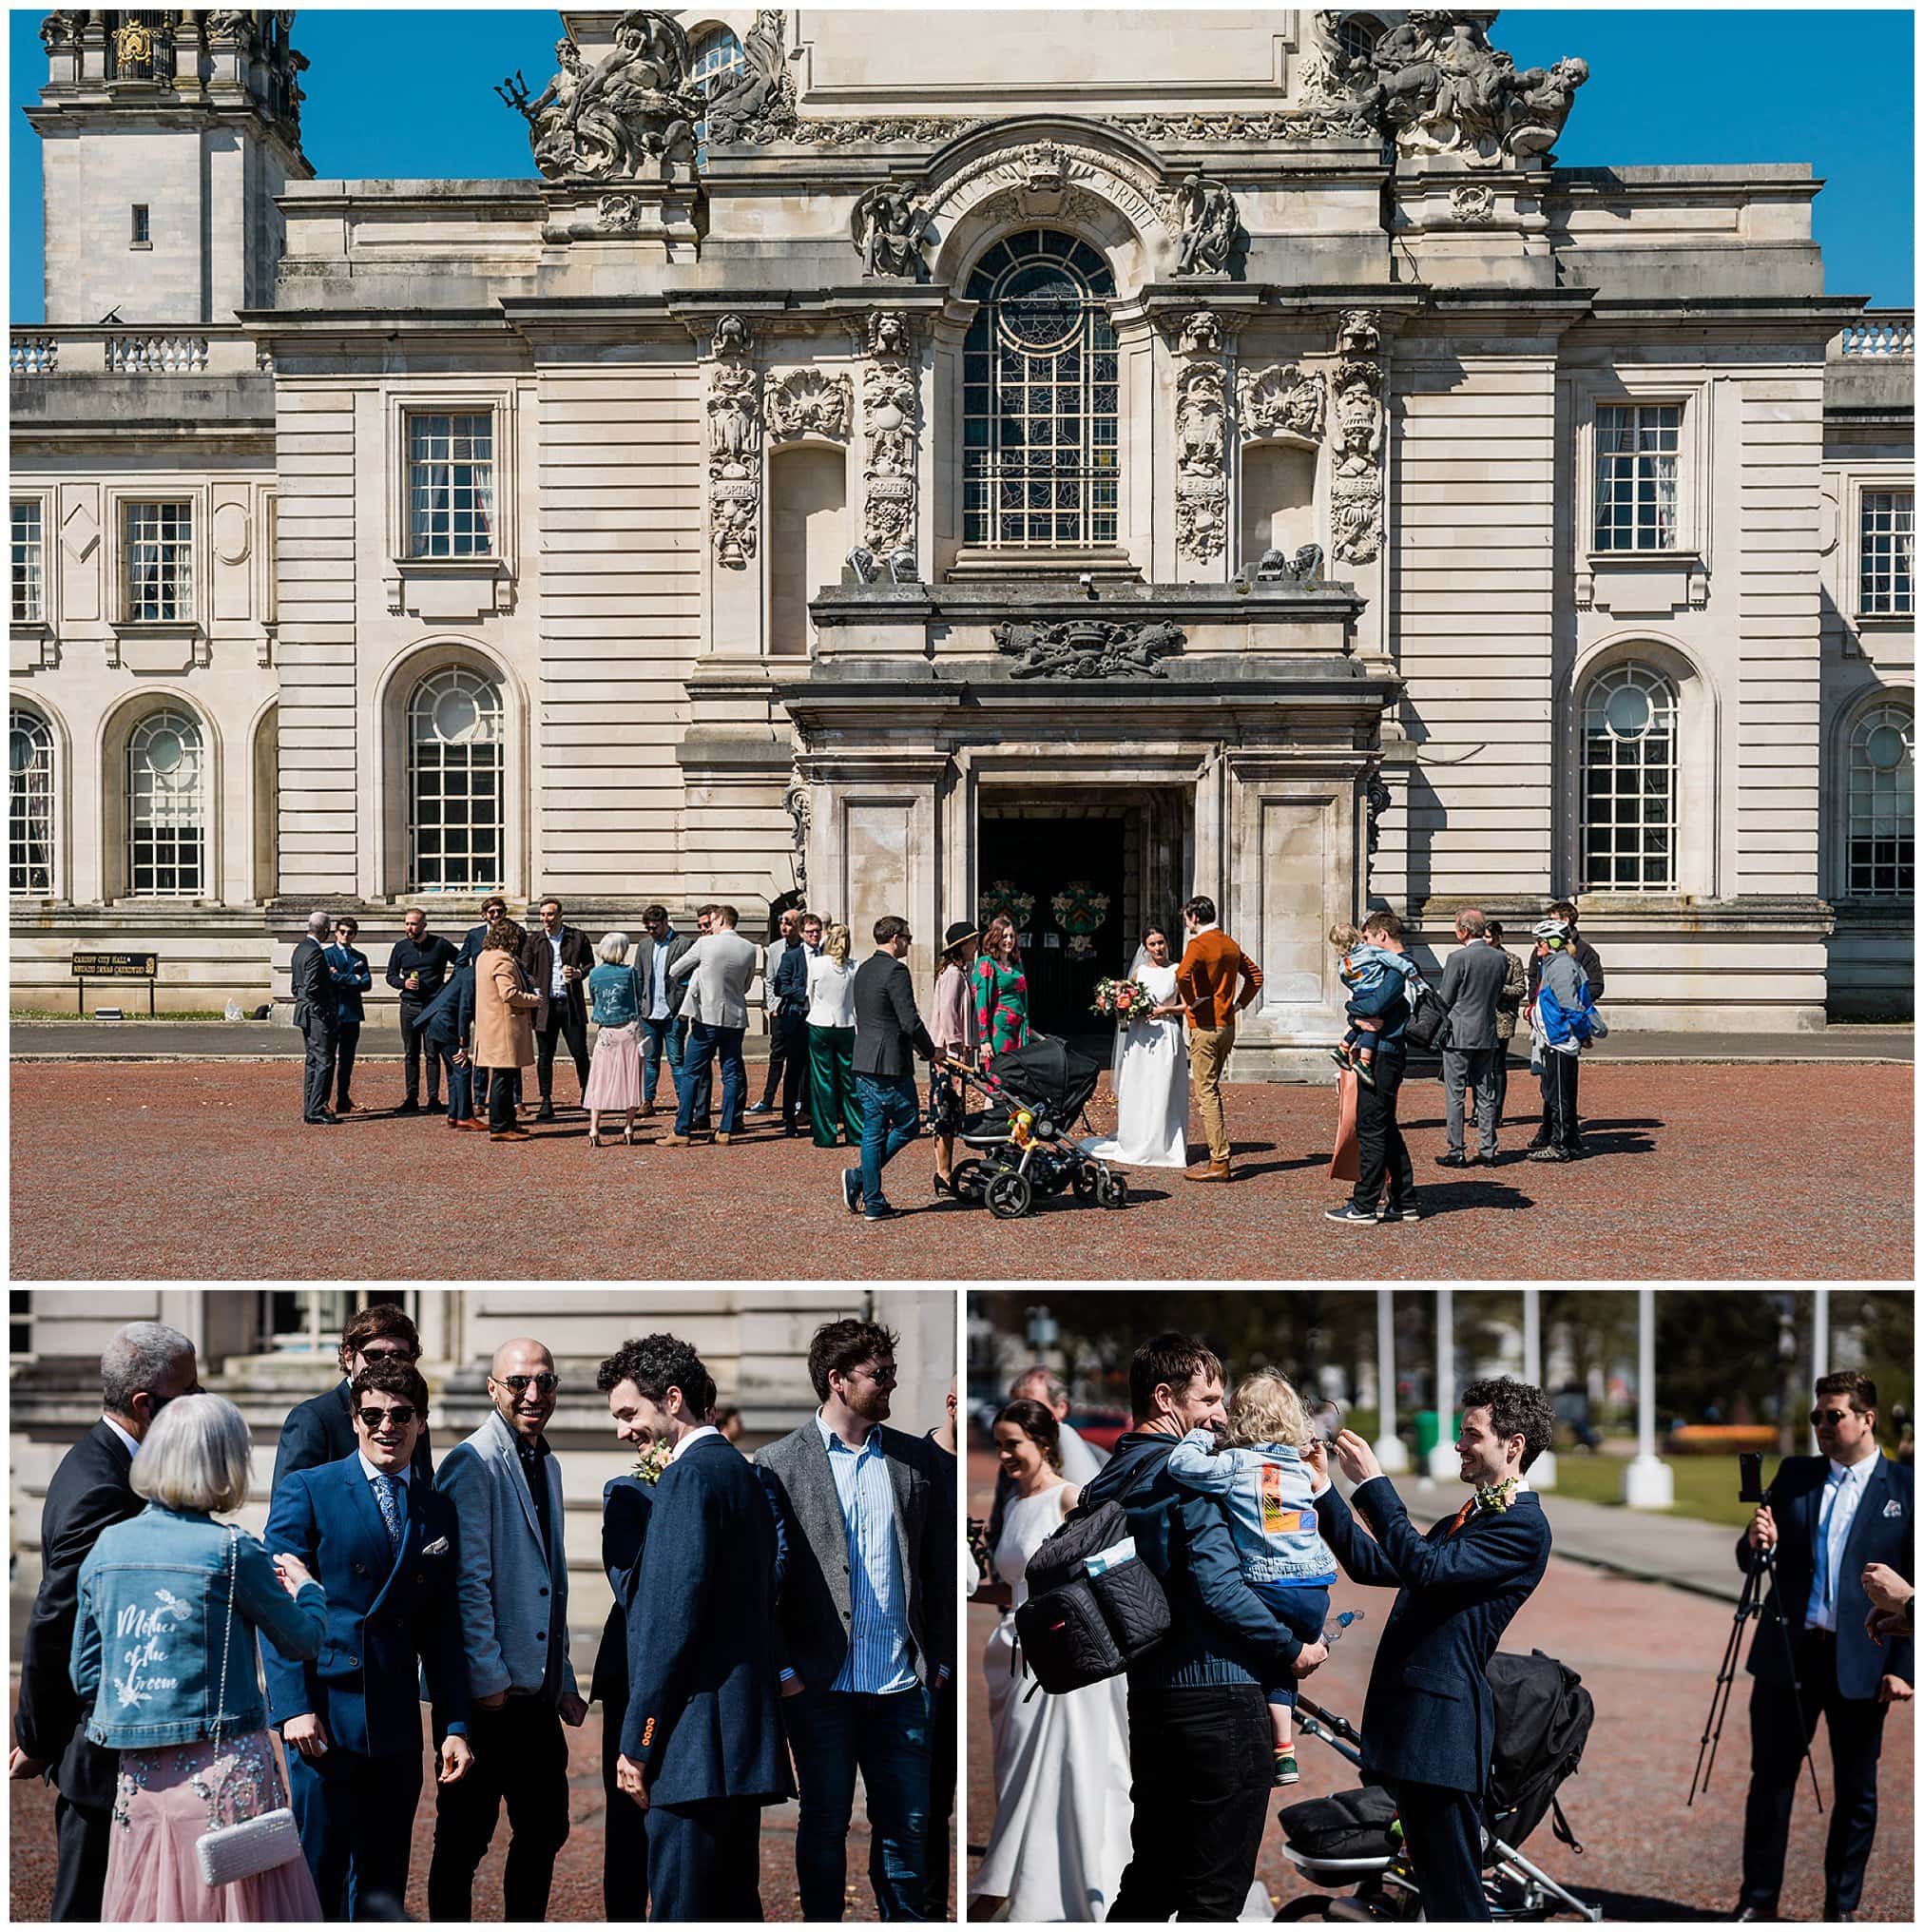 After a wedding ceremony at Cardiff City Hall